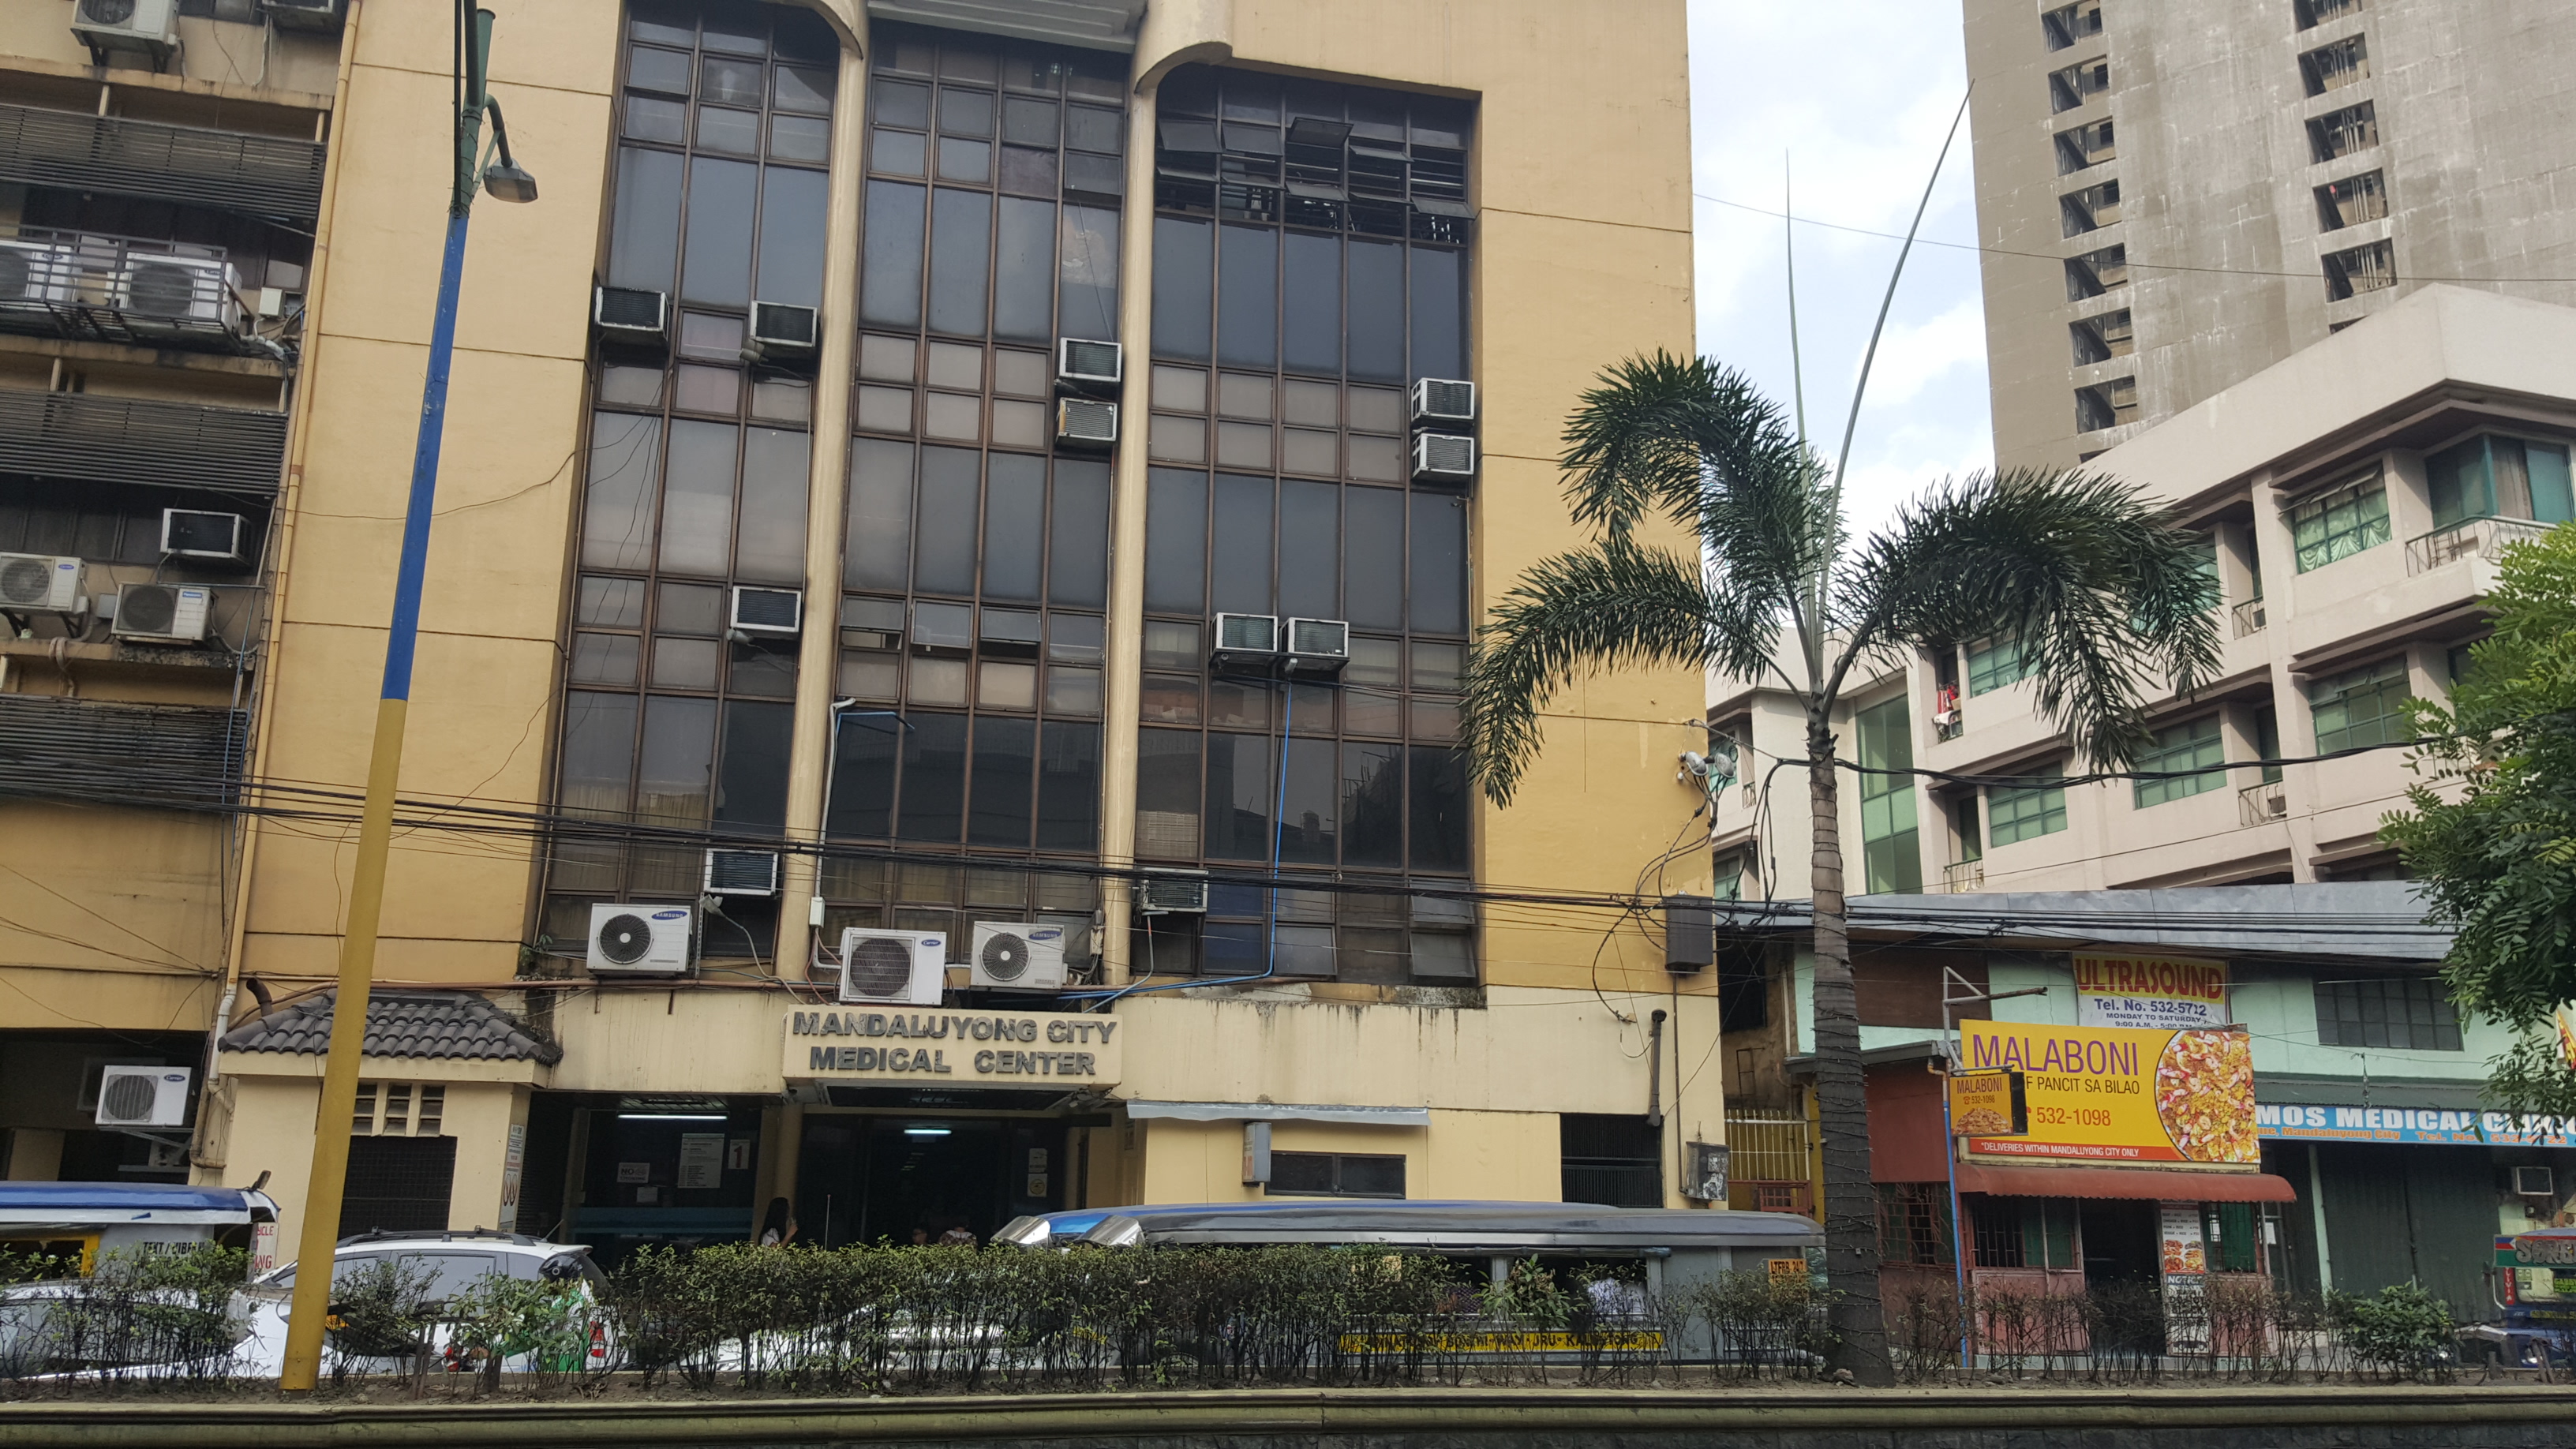 GARV'S Boutique Hotel is located in front of the Mandaluyong Medical Center.